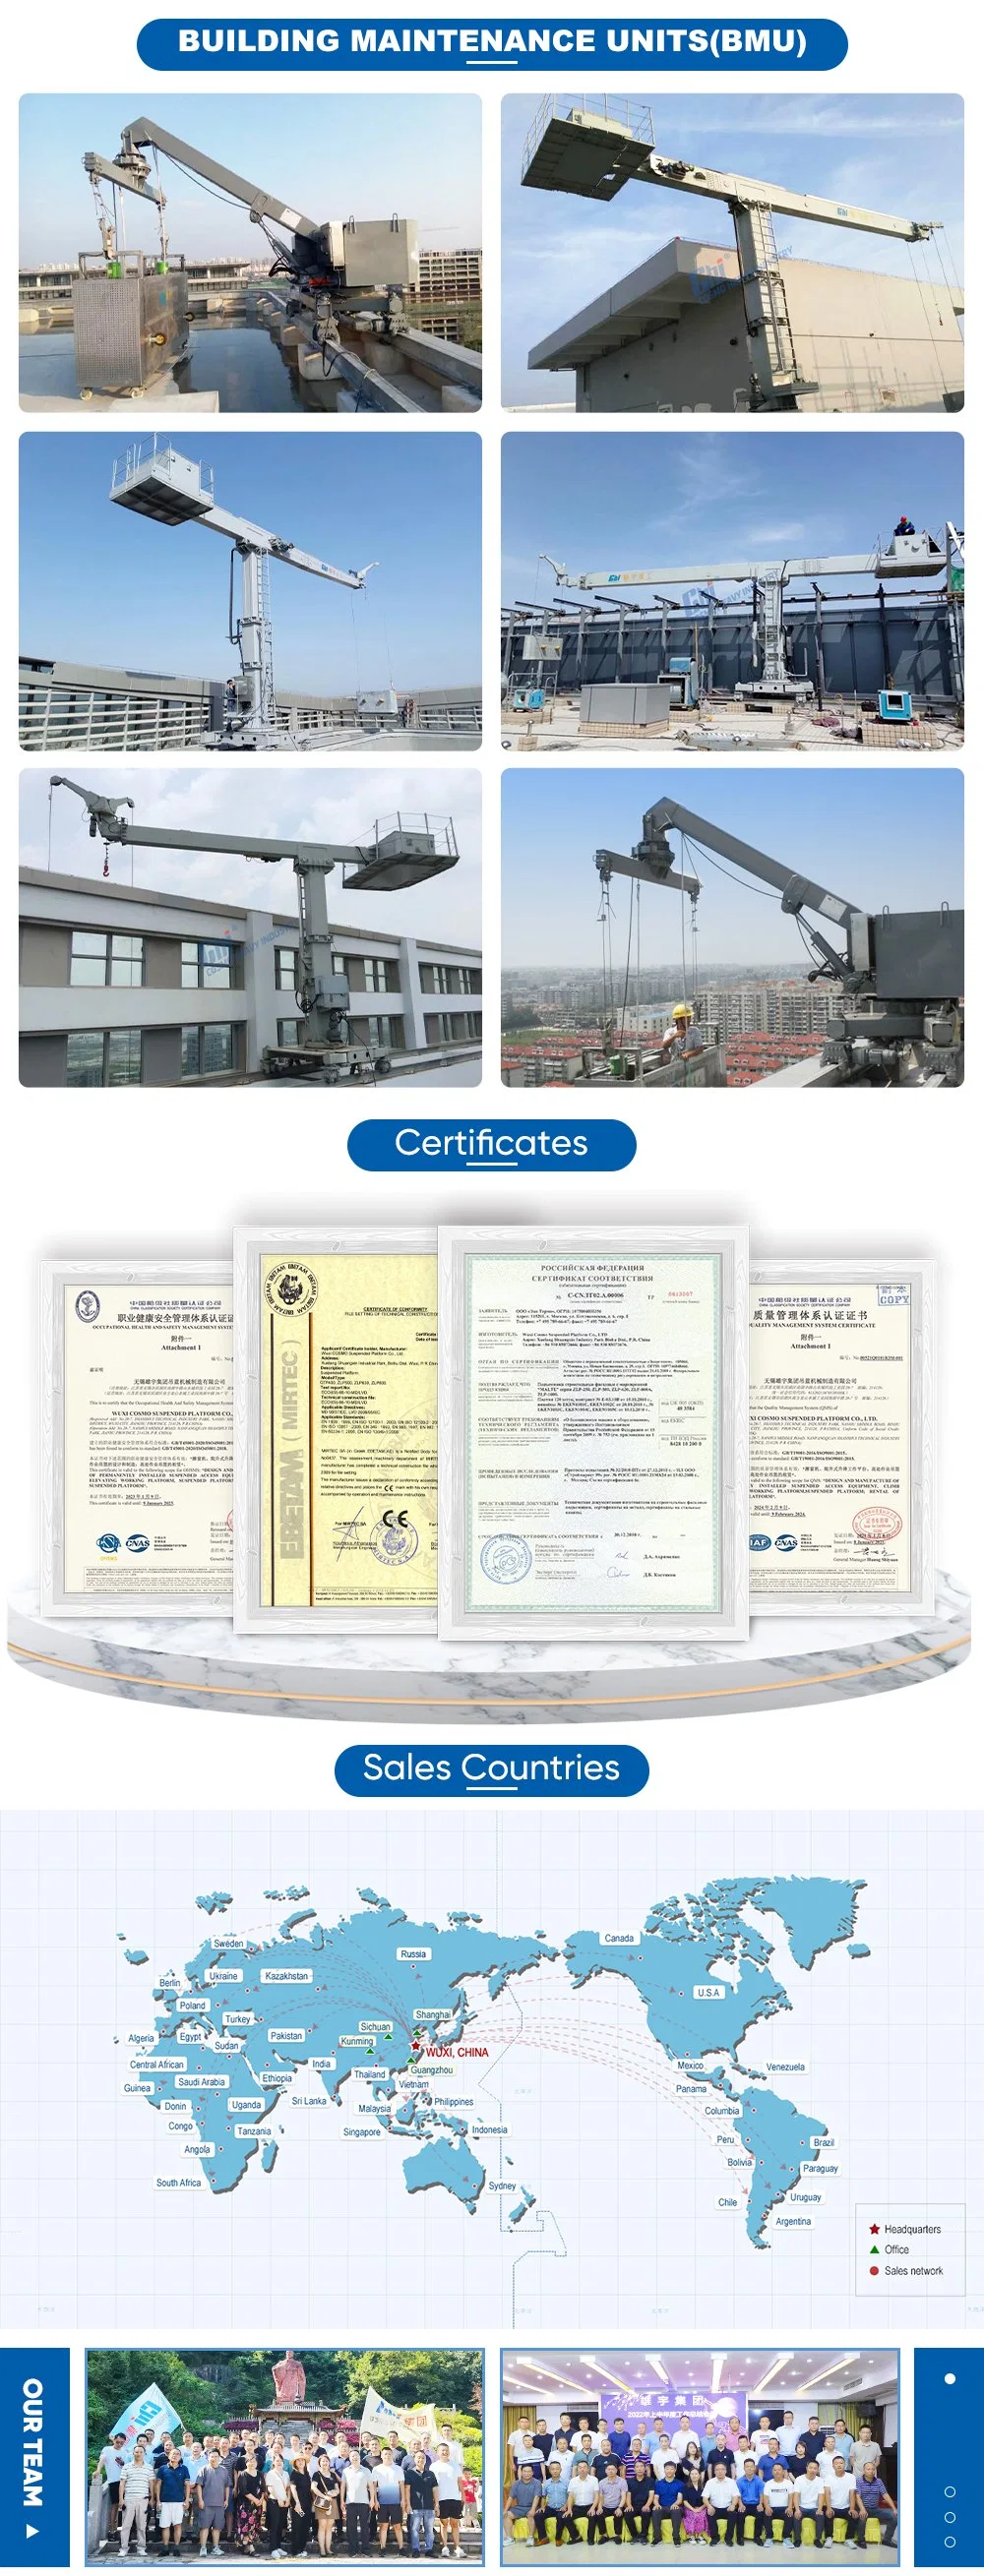 Chi/Cosmo Zlp630 Zlp800 Andamio Colgante, Suspended Platform, Scaffolding with Sii Certificate